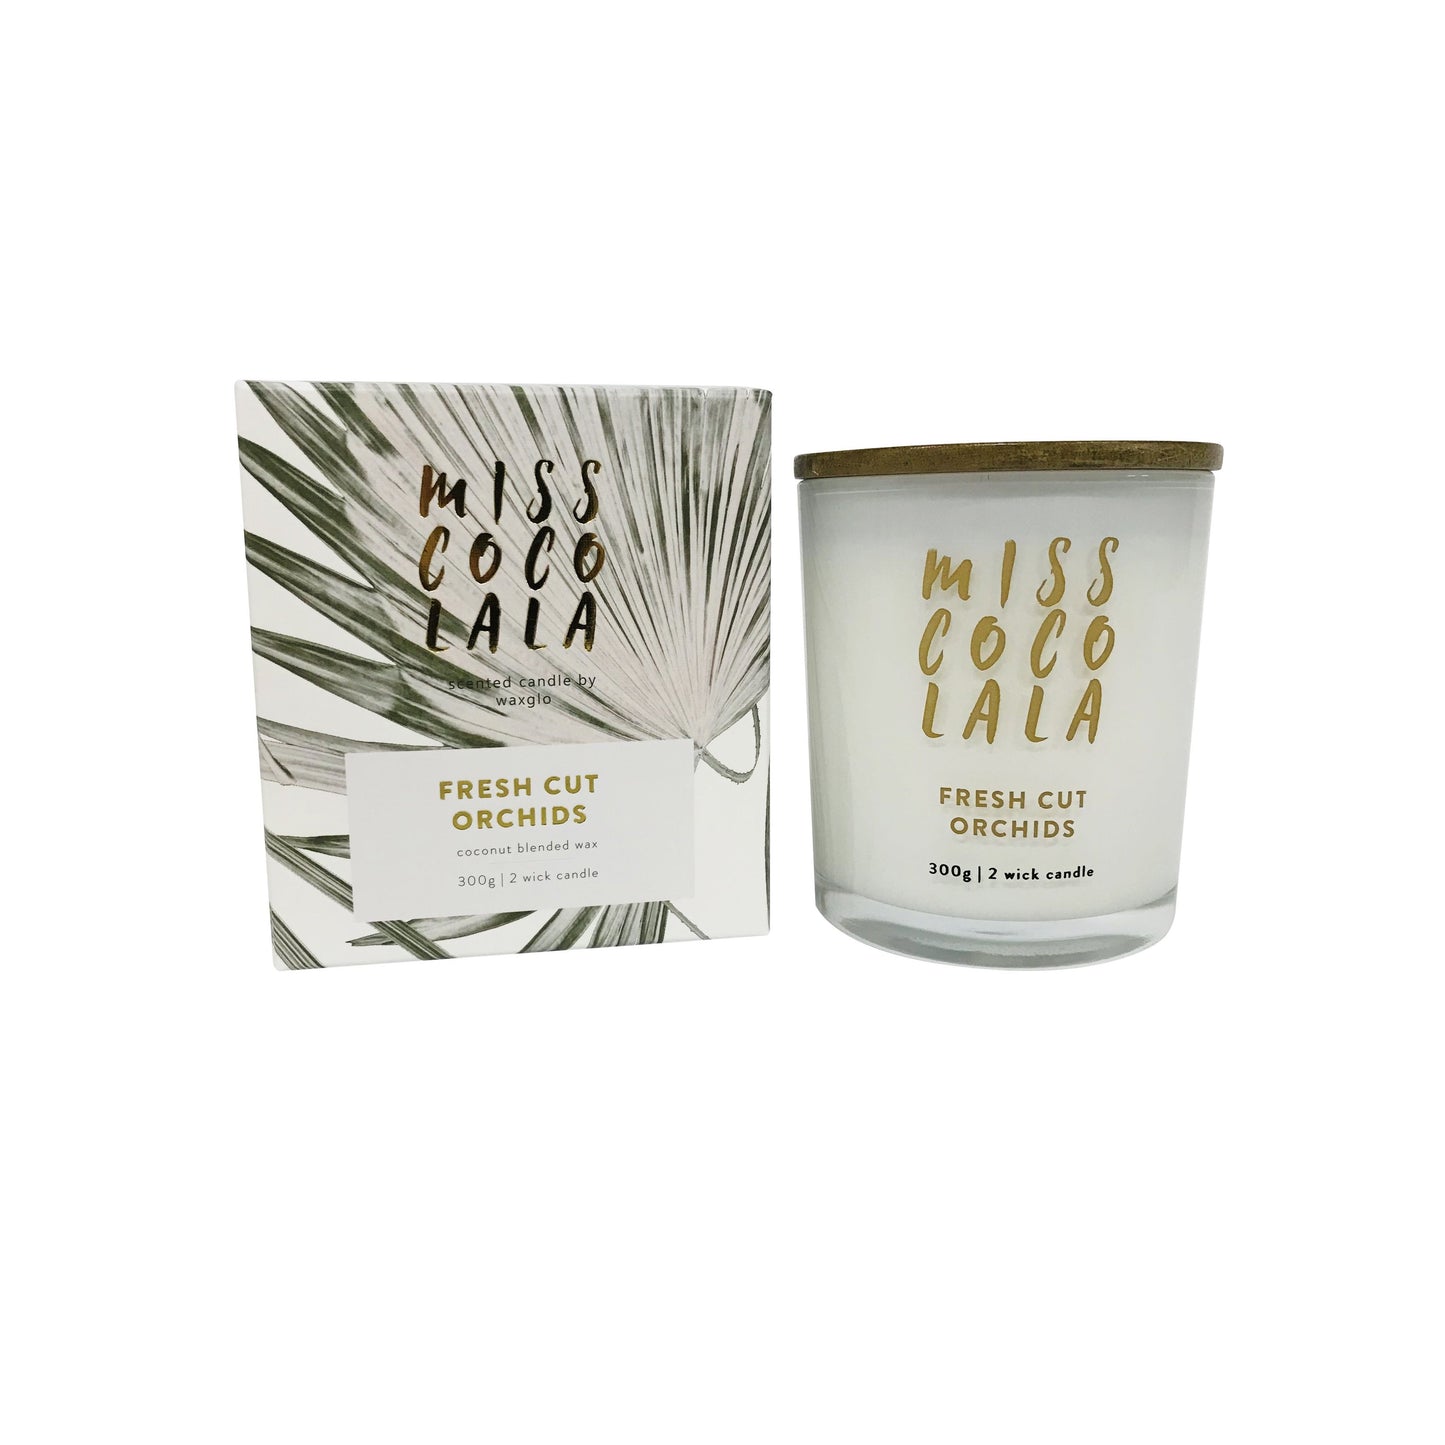 Fresh Cut Orchids Candle - 300g